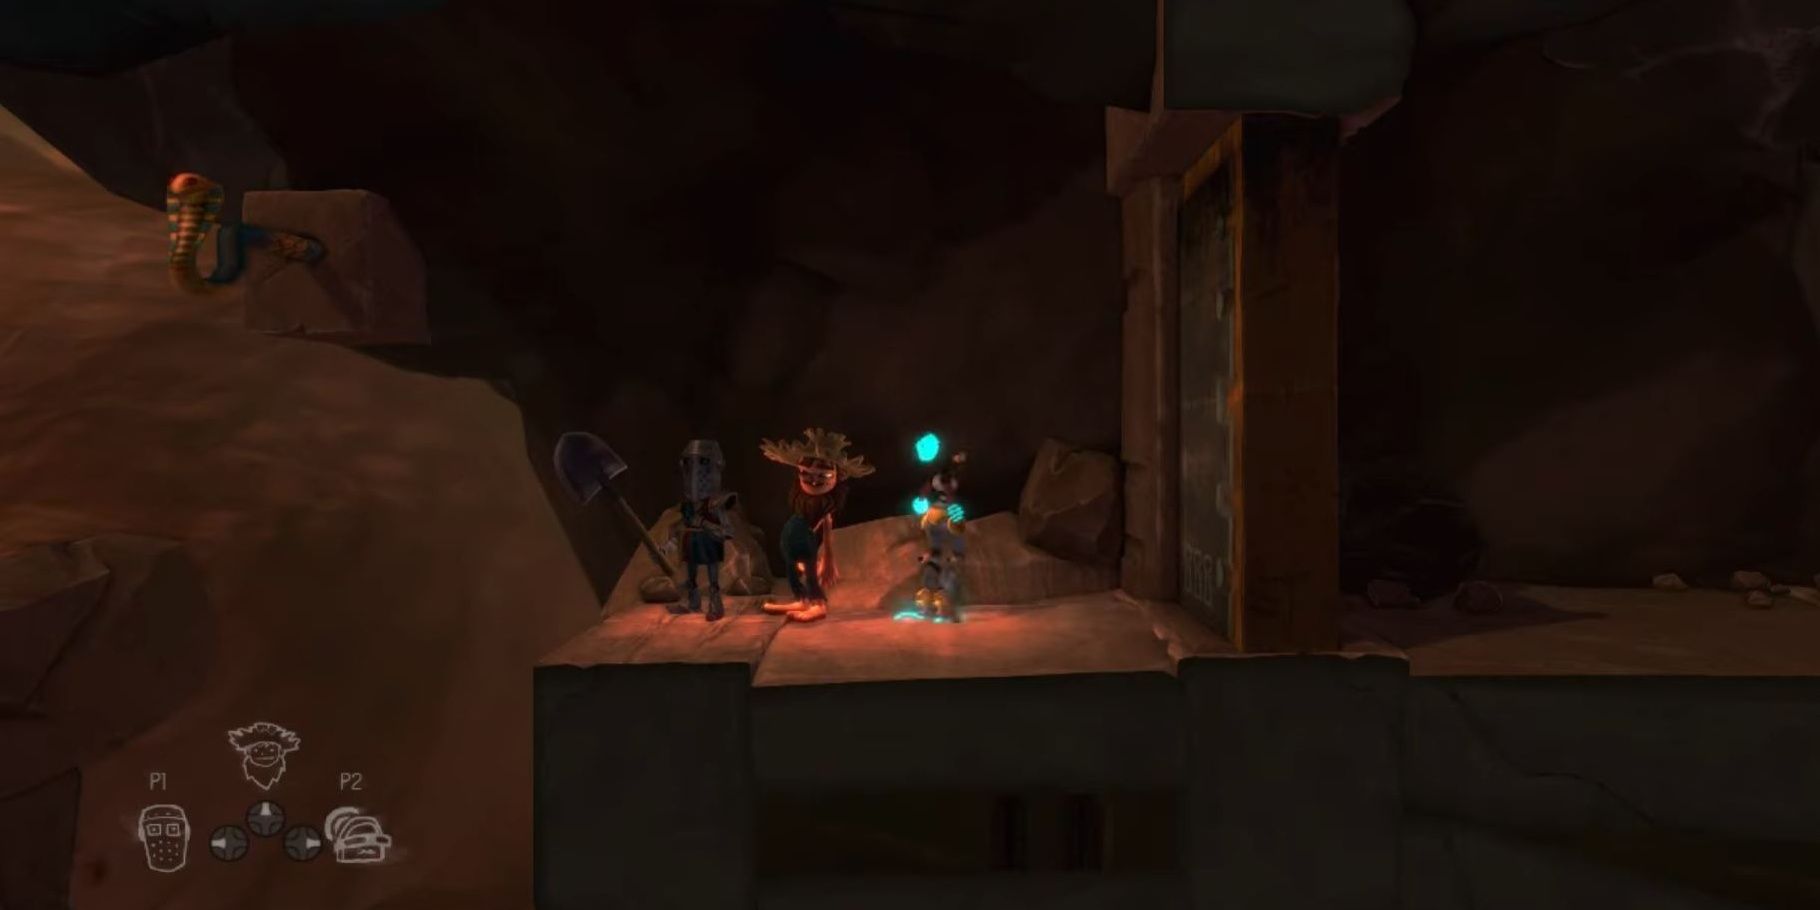 3 Characters Standing On Ridge In The Cave